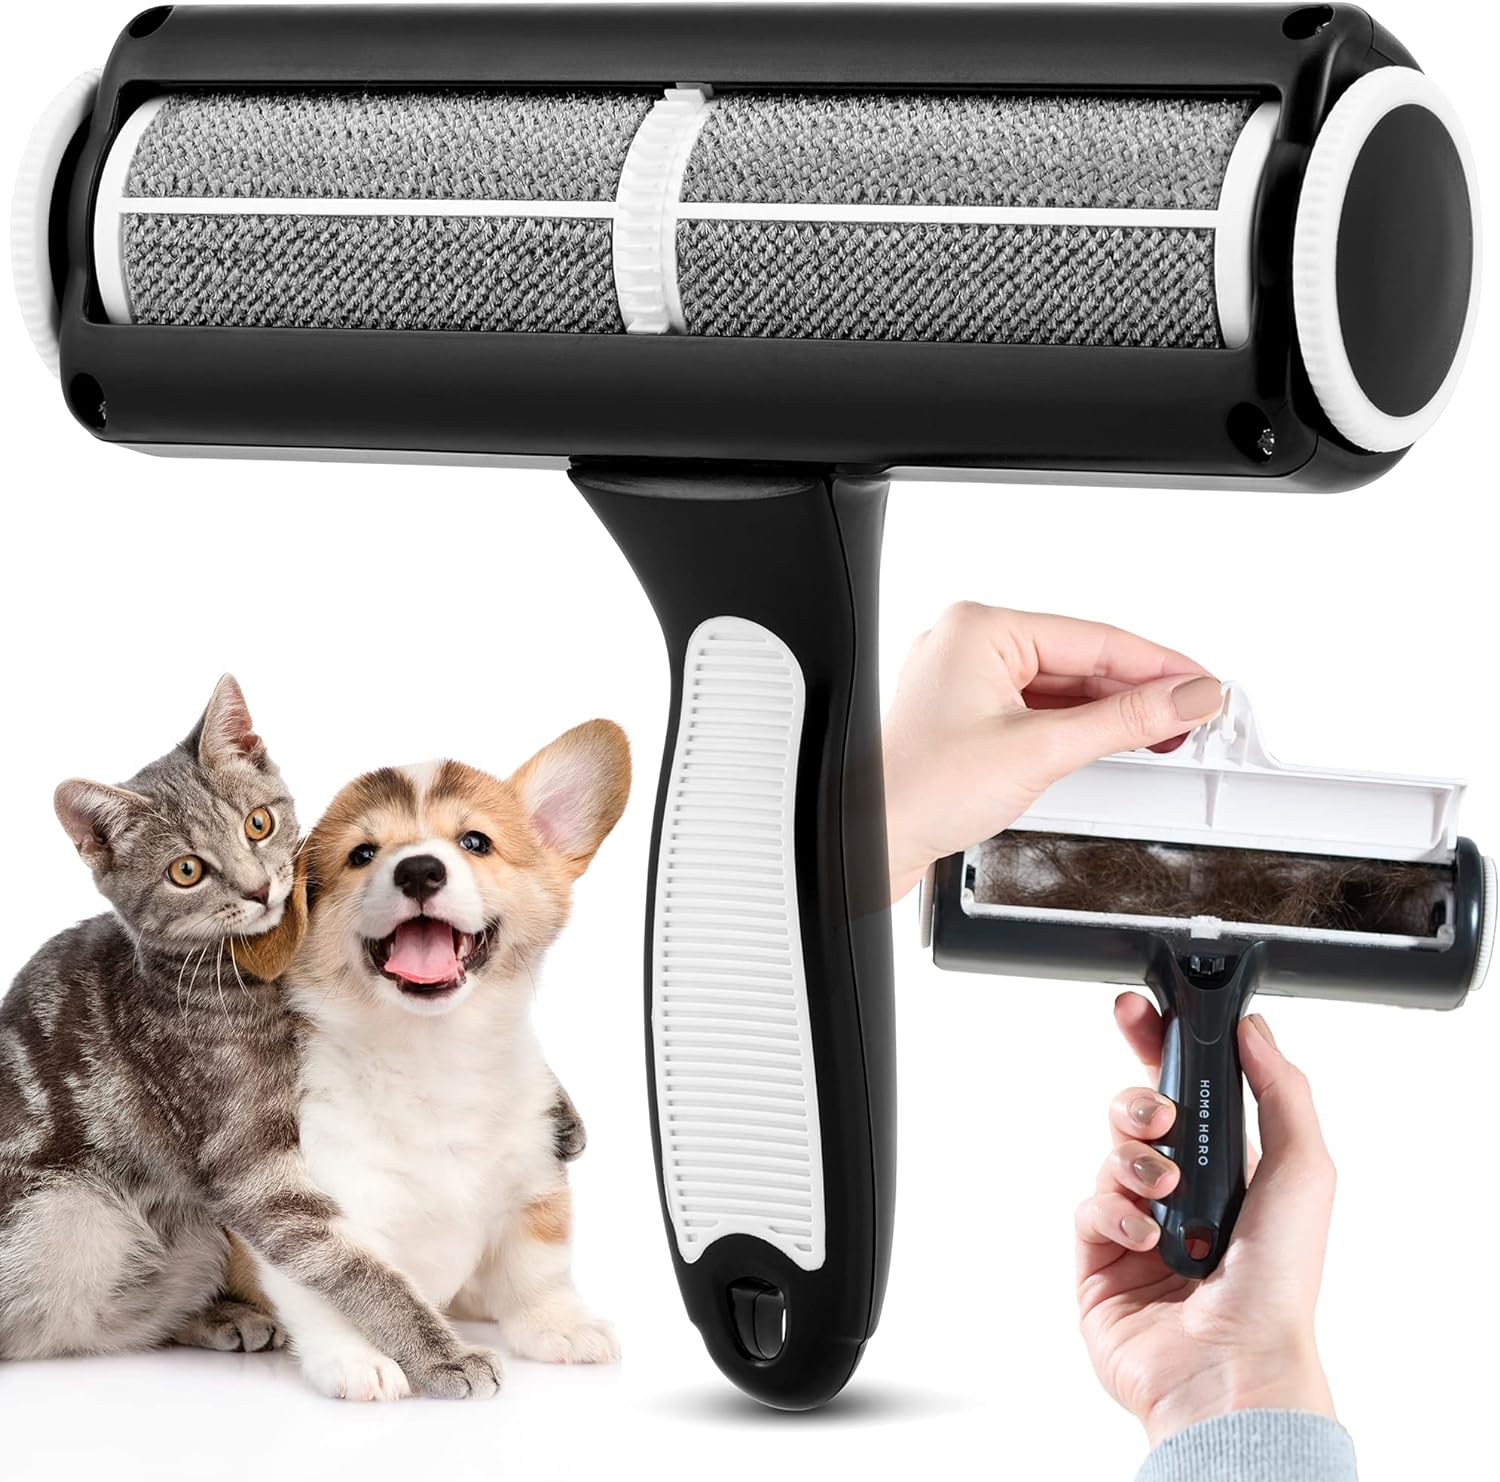  BLACK+DECKER Pet Hair Remover, Roller, Remove Dog Hair and Cat  Hair Easily (HMSCT0001)